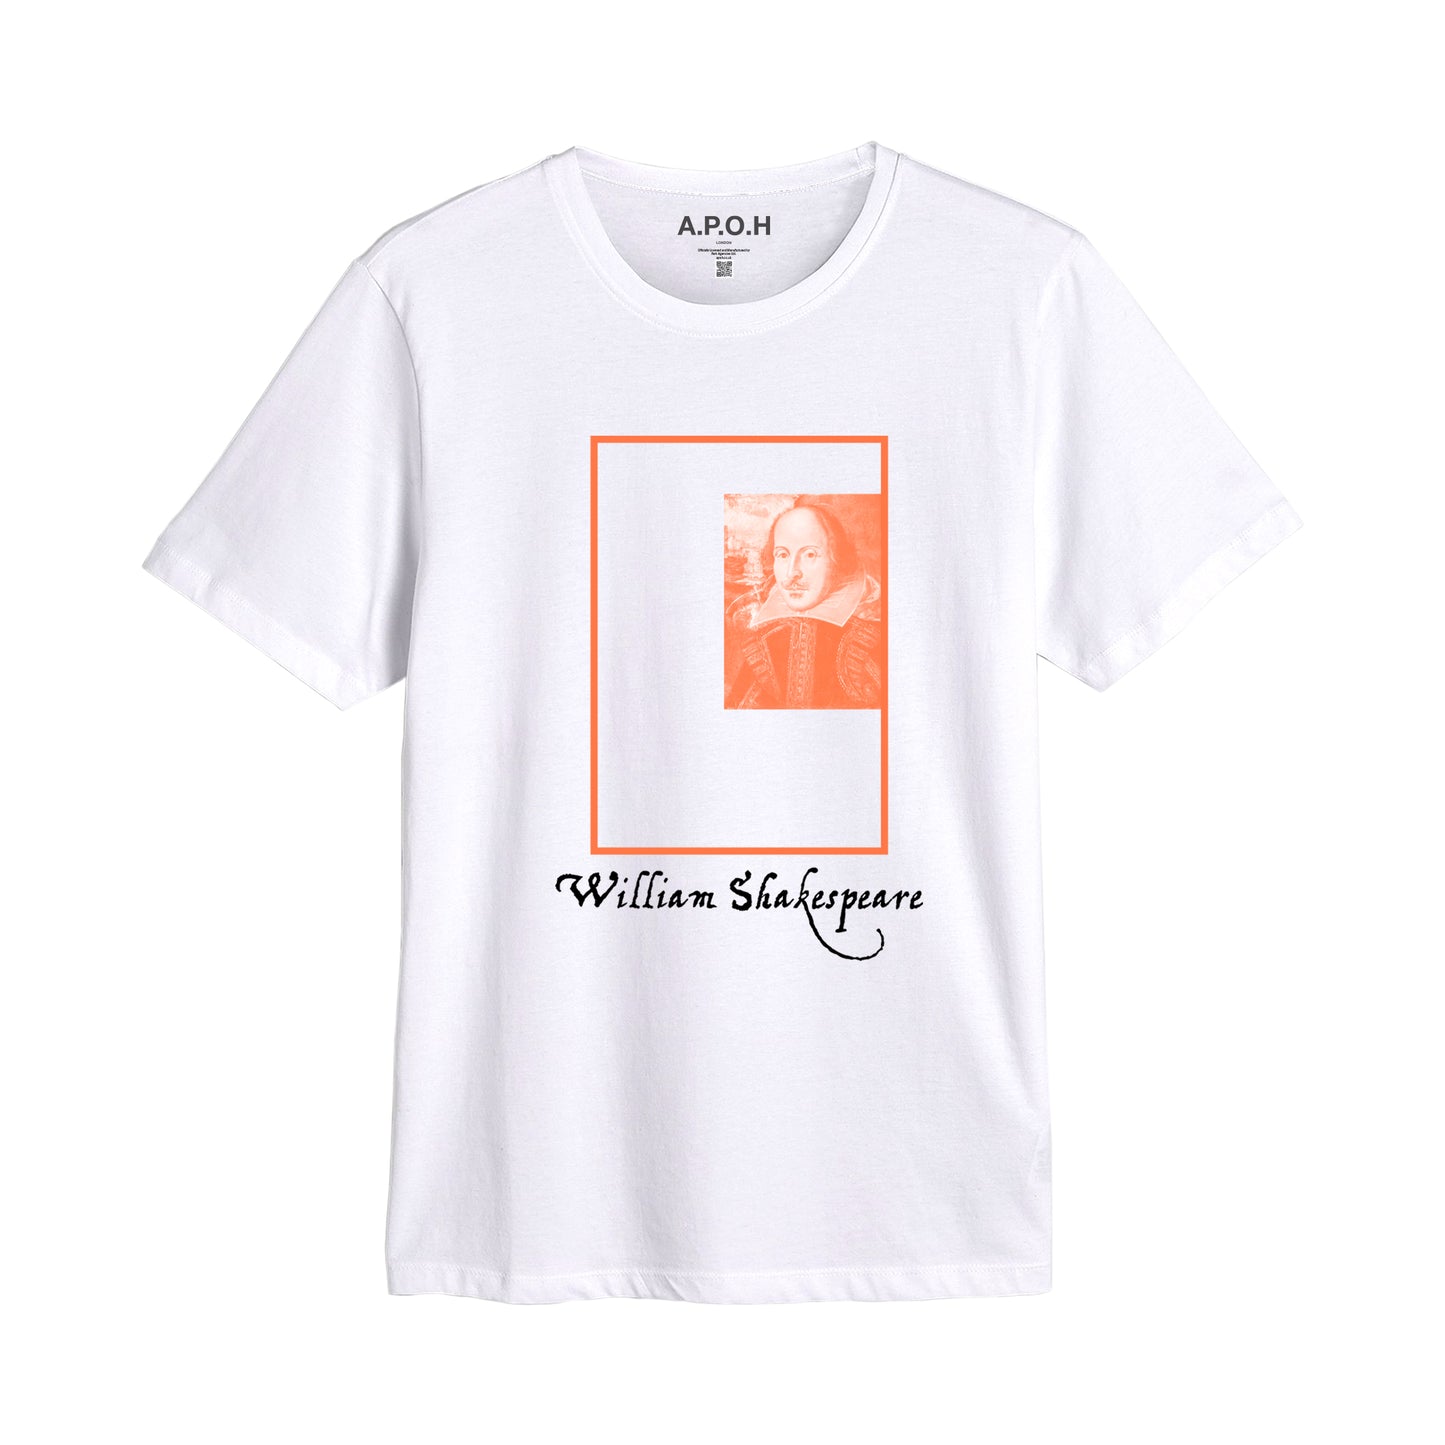 William Shakespeare 1564 - 1616 Placement T-Shirt